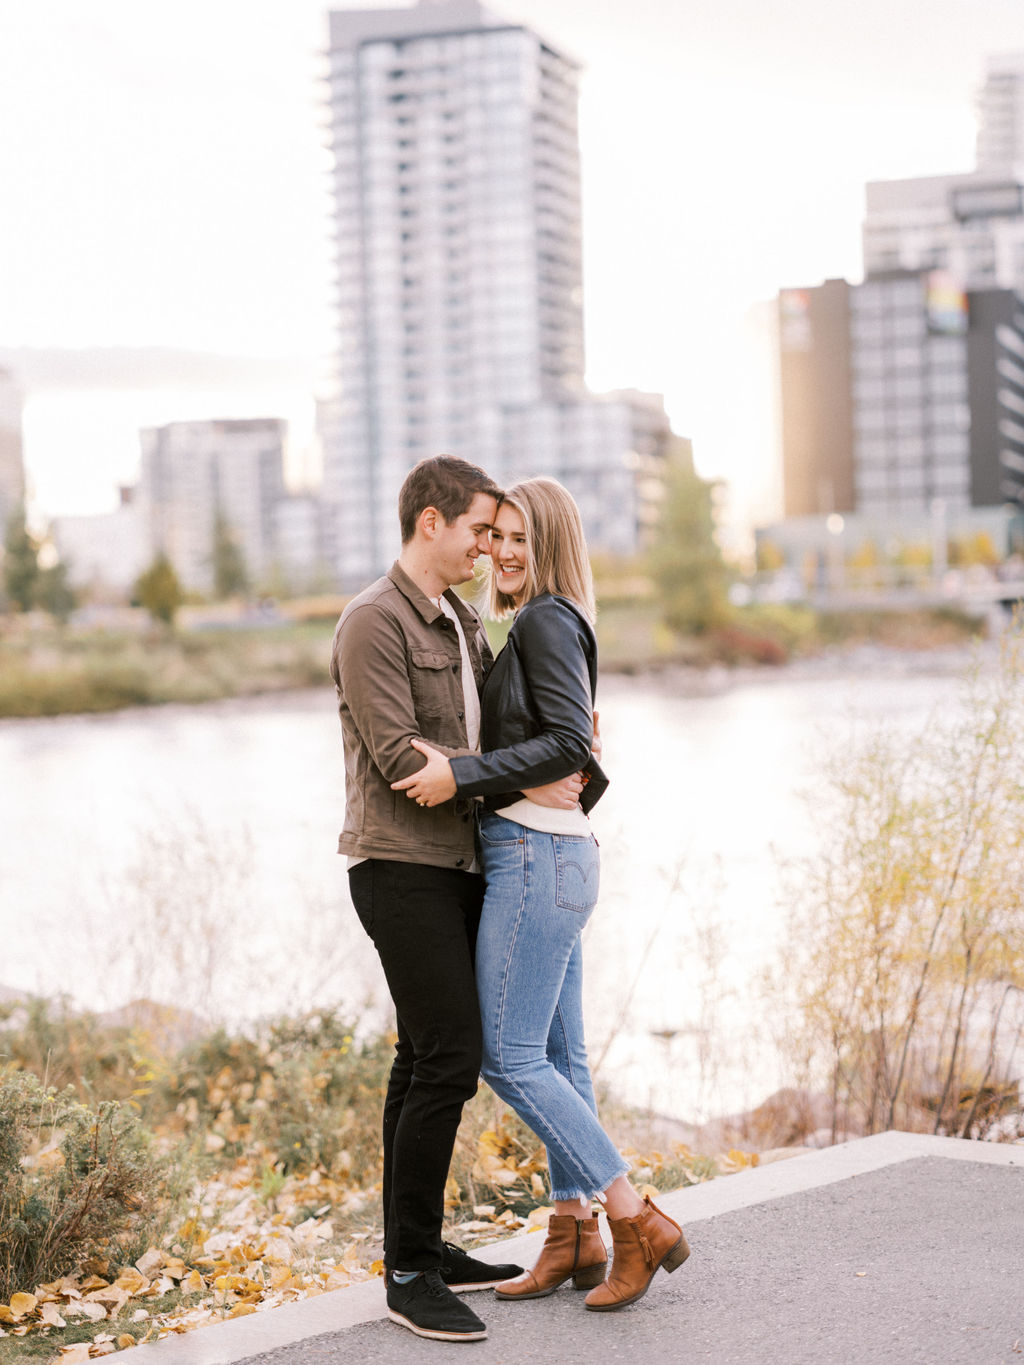 how to plan your engagement session, Fall East Village Engagement Nicole Sarah Photography, calgary wedding photographers, calgary wedding photographer, fall engagement, fall engagement outfits, fall engagement outfit ideas, engagement ideas, leather jacket, couple walking sunset, east village calgary, best wedding photographers canada, fun engagement photos, engagement poses romantic